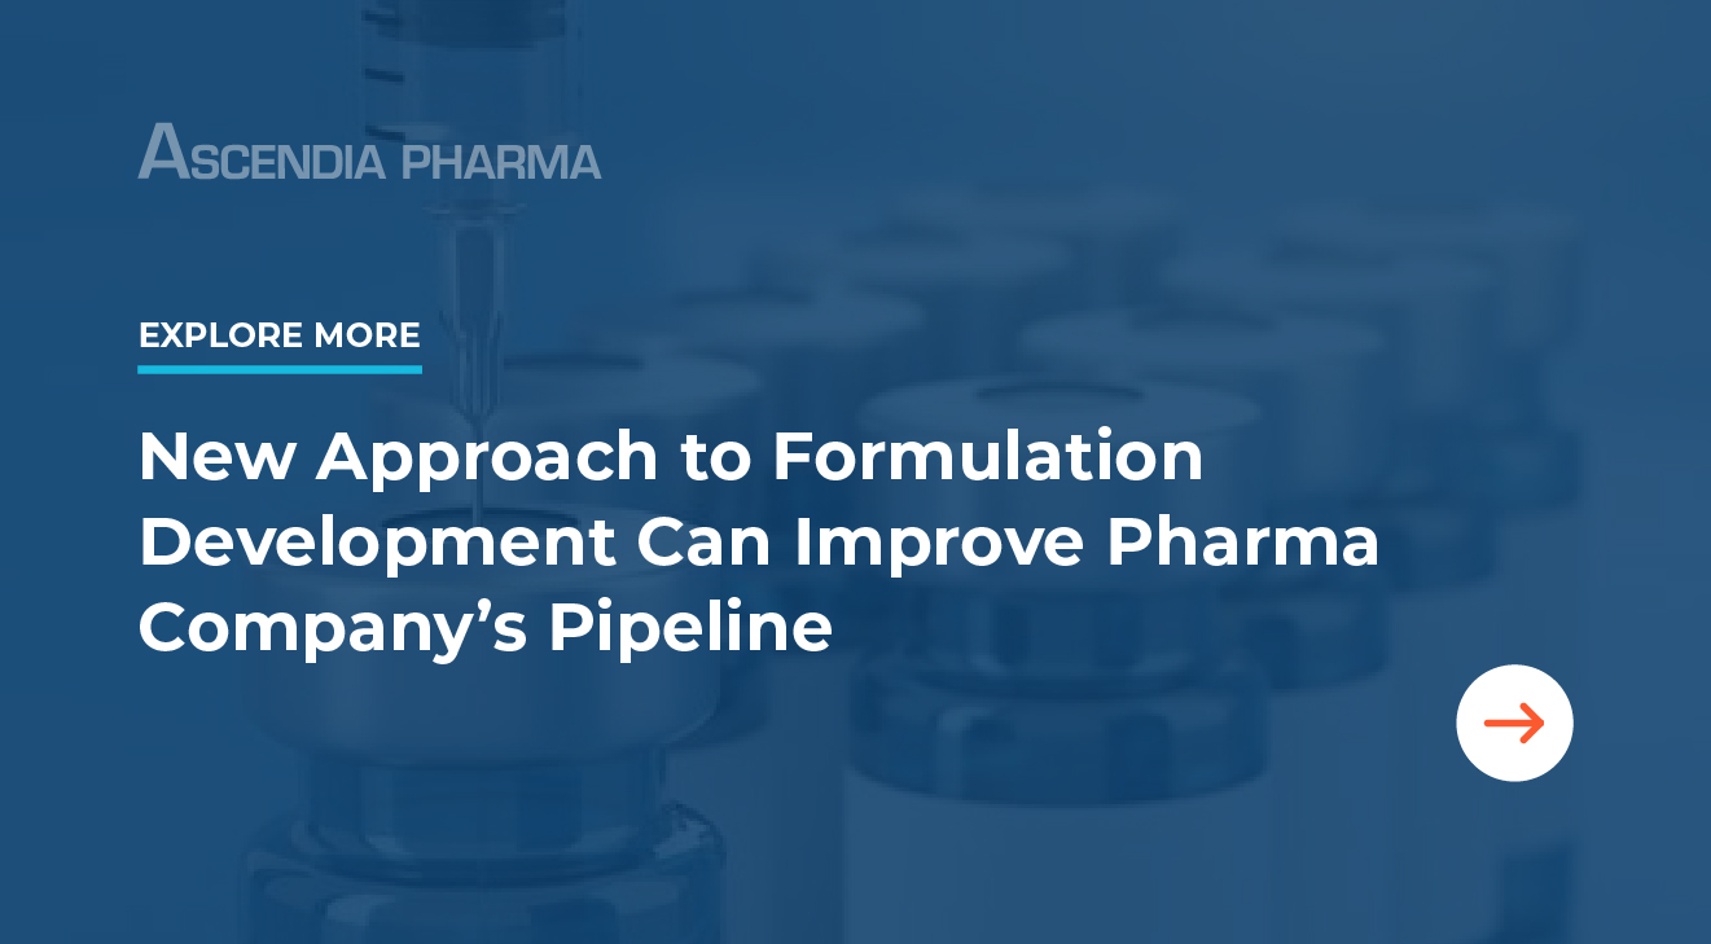 New Approach to Formulation Development Can Improve Pharma Company's Pipeline